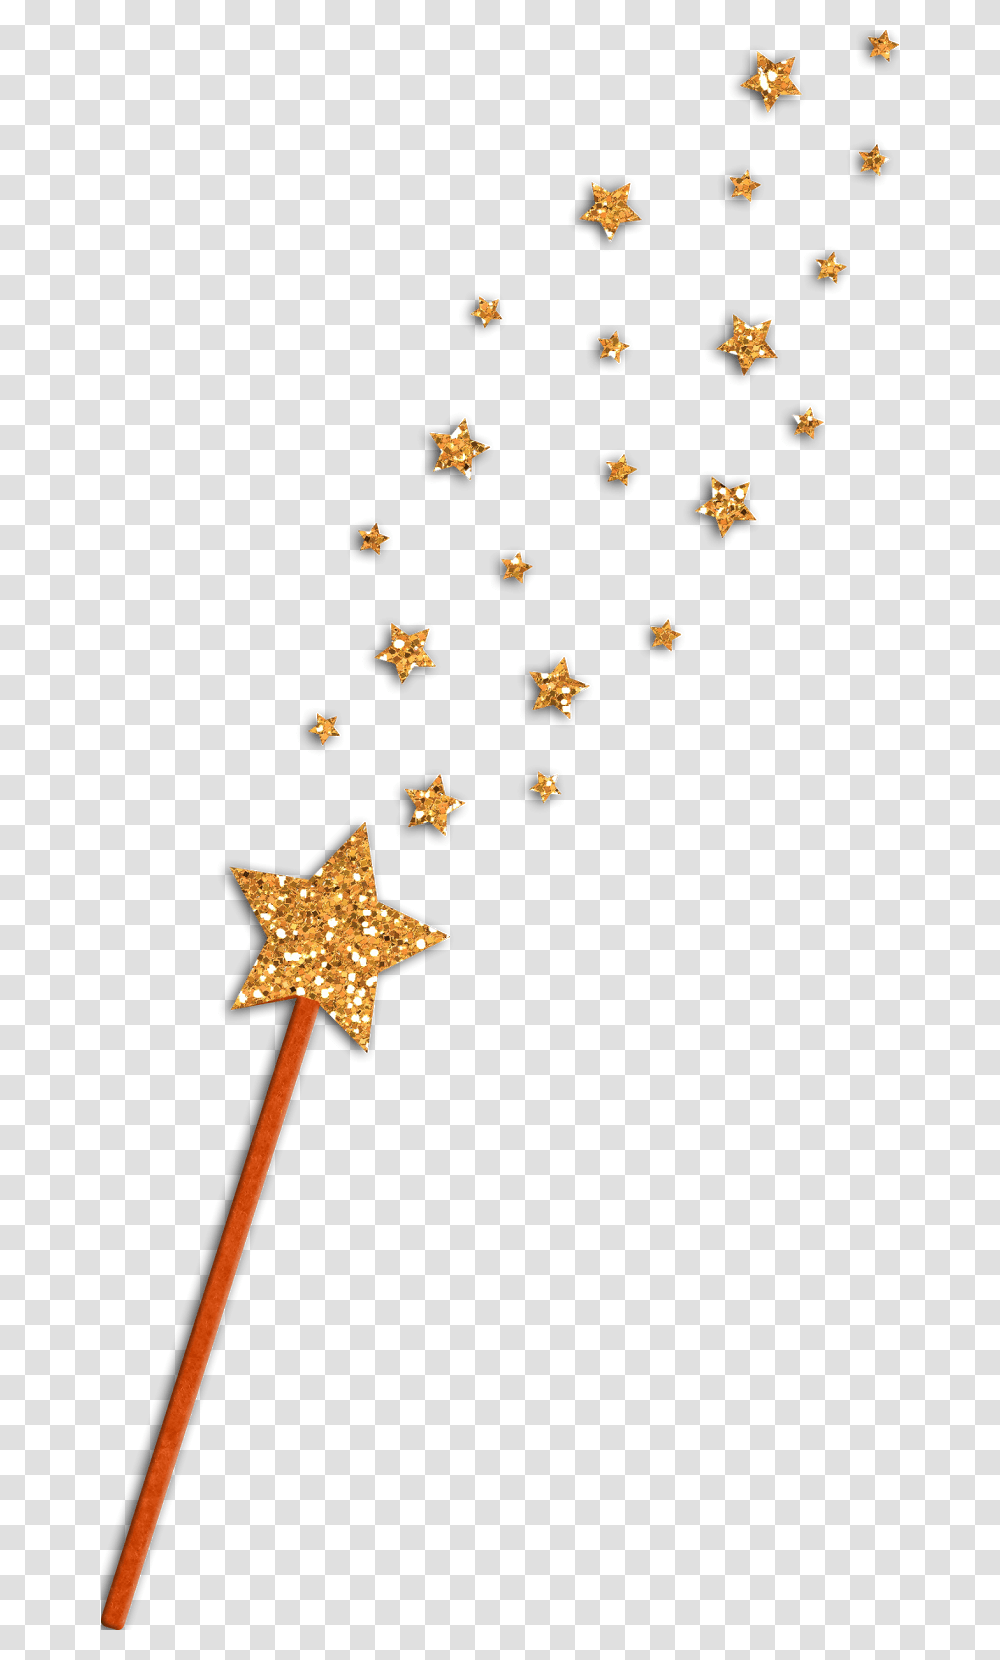 Princess And Fairytale Oh Fairytale Clipart, Star Symbol, Wand, Cross Transparent Png